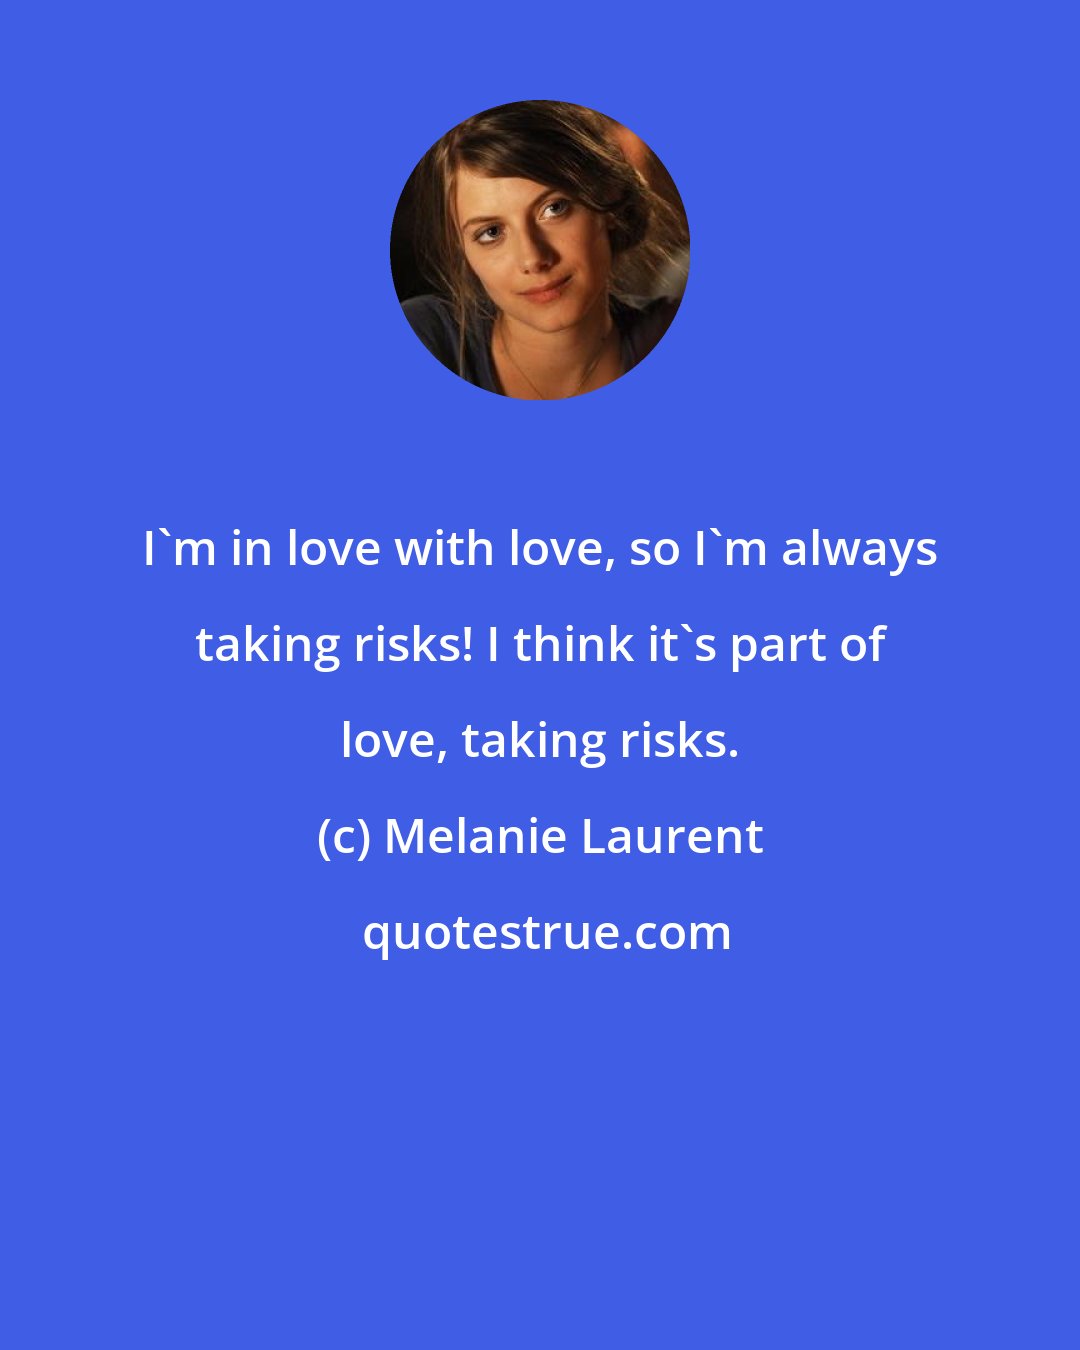 Melanie Laurent: I'm in love with love, so I'm always taking risks! I think it's part of love, taking risks.